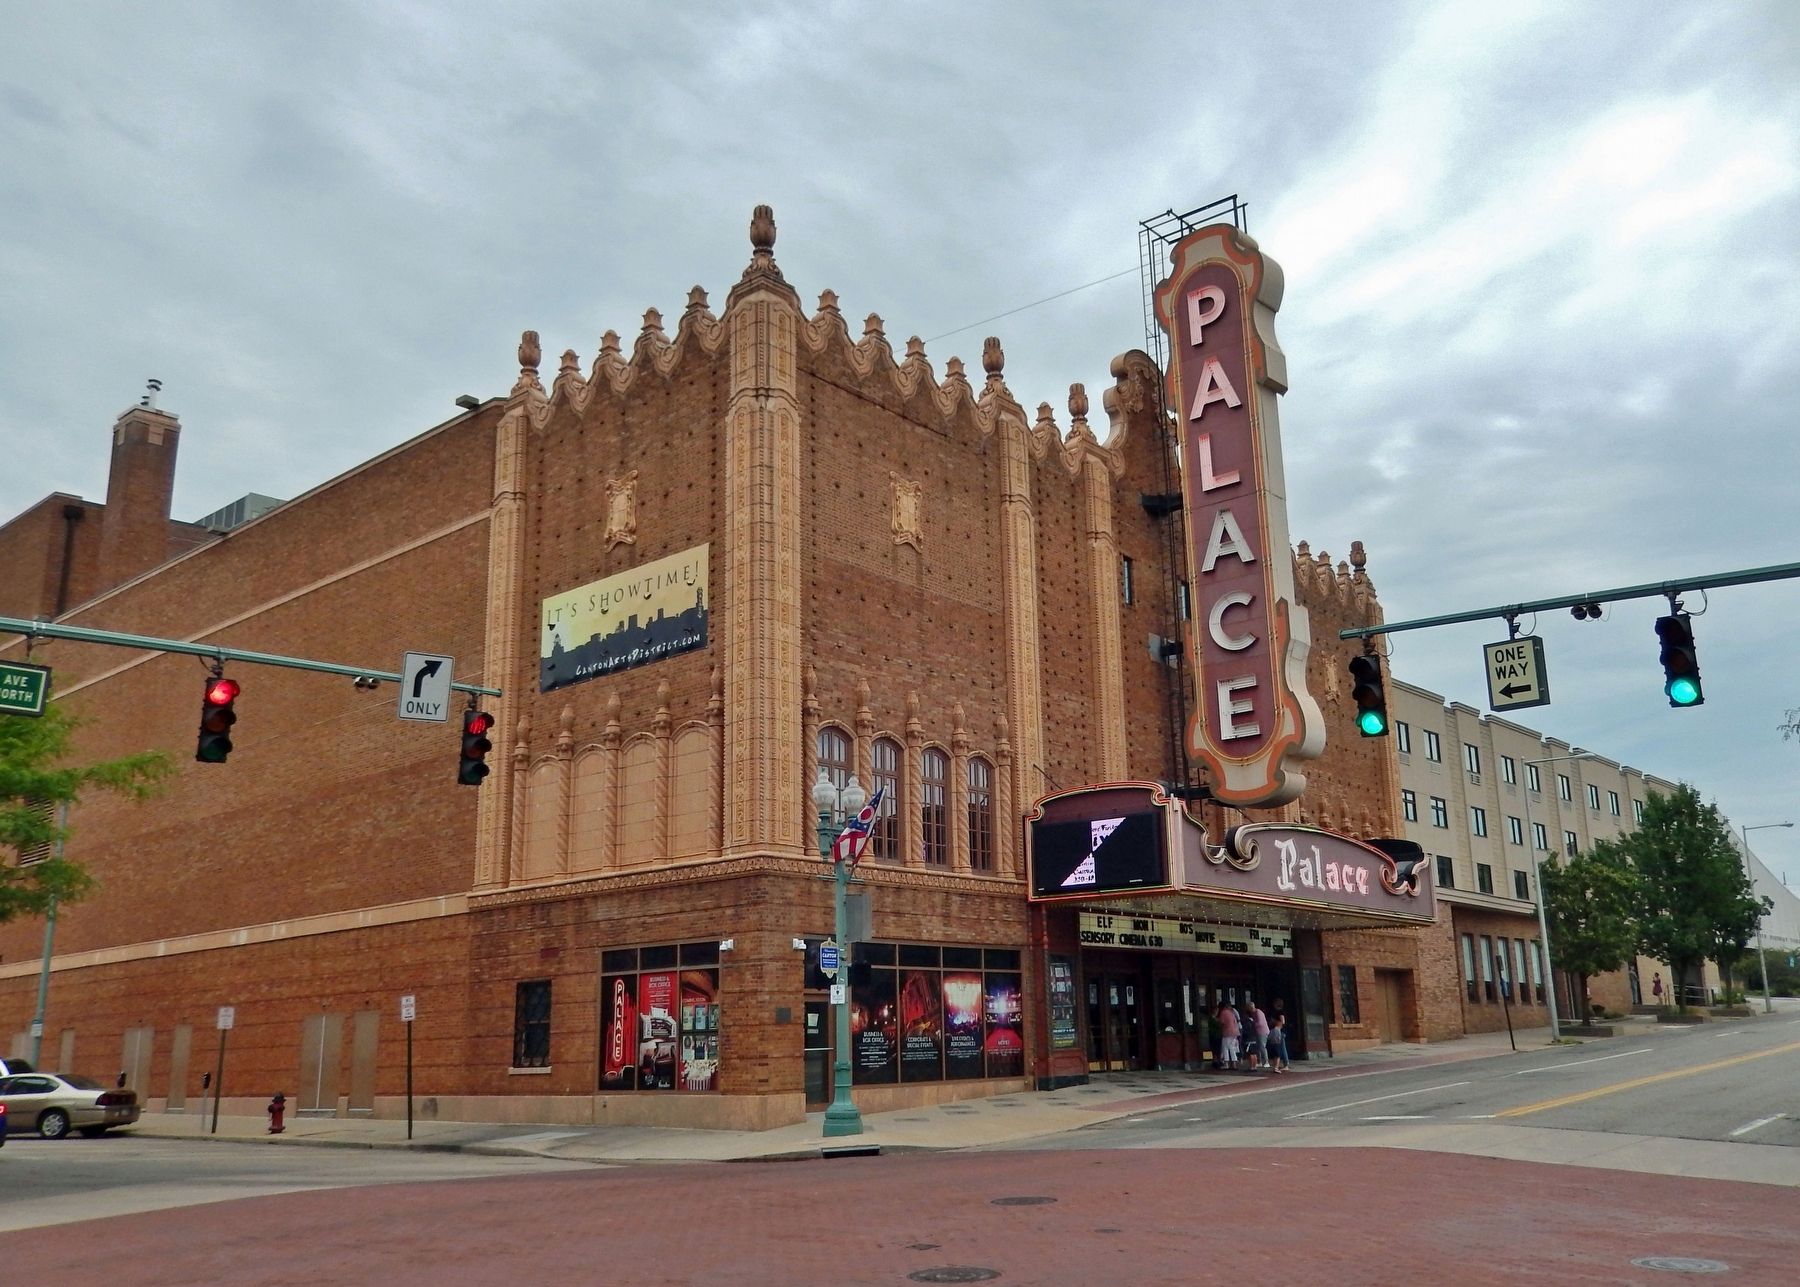 Palace Theatre (<i>southeast elevation</i>) image. Click for full size.